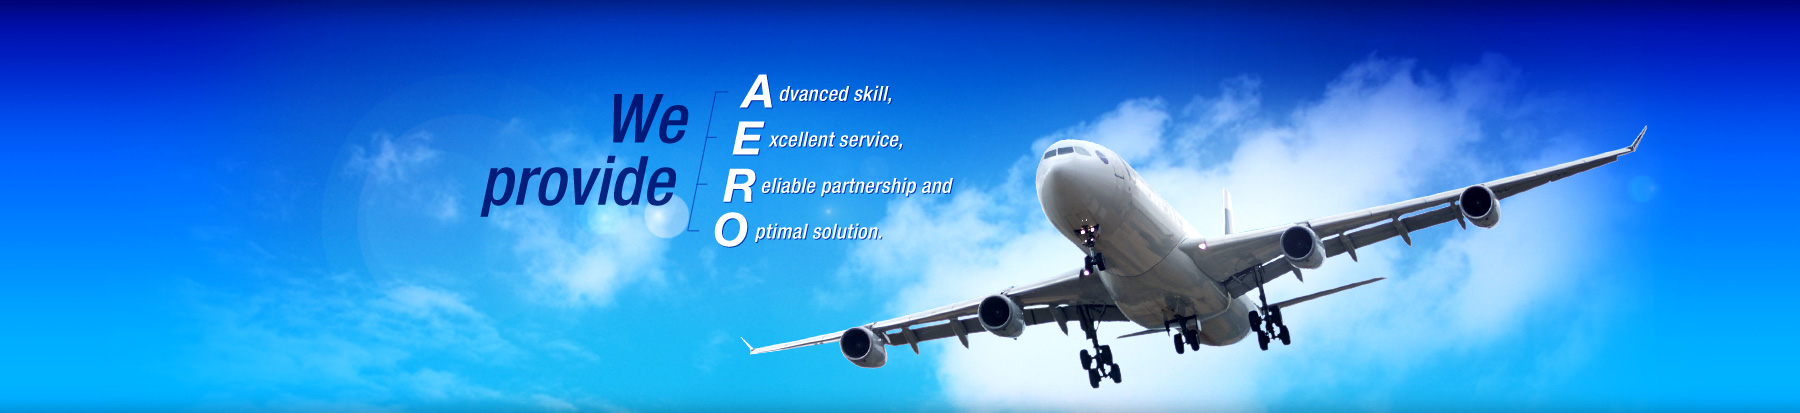 We provide an Advanced skill,
              Excellent service, Reliable partnership and Optimal
              solution.